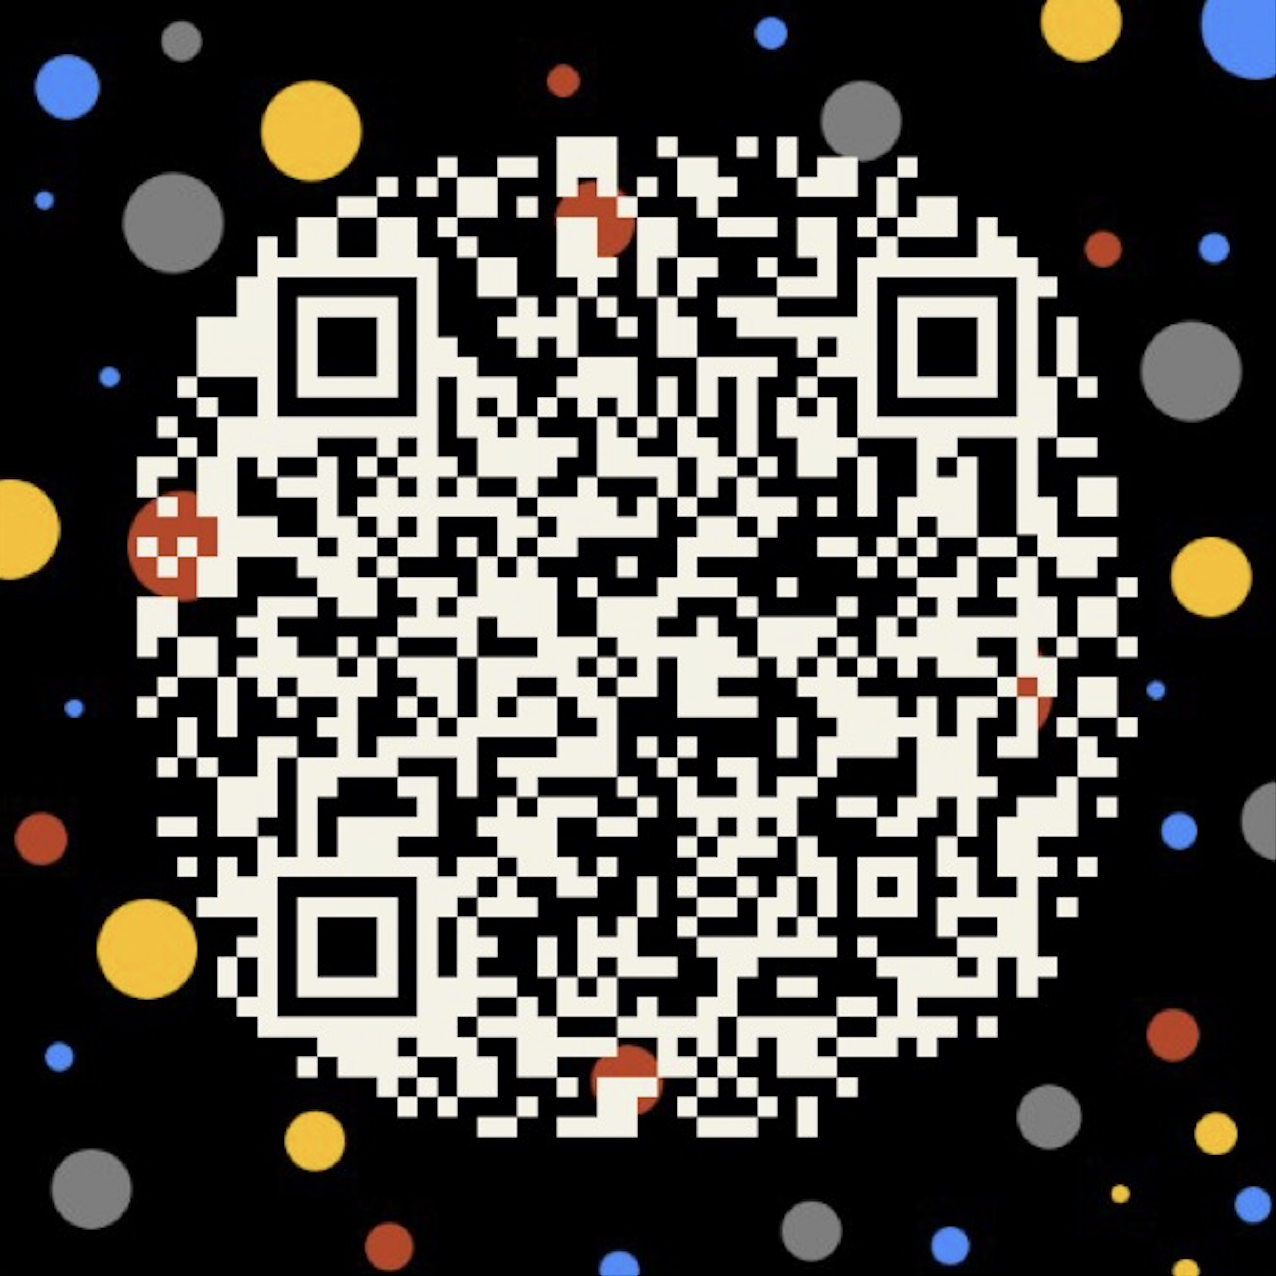 static/image/qrcode.png